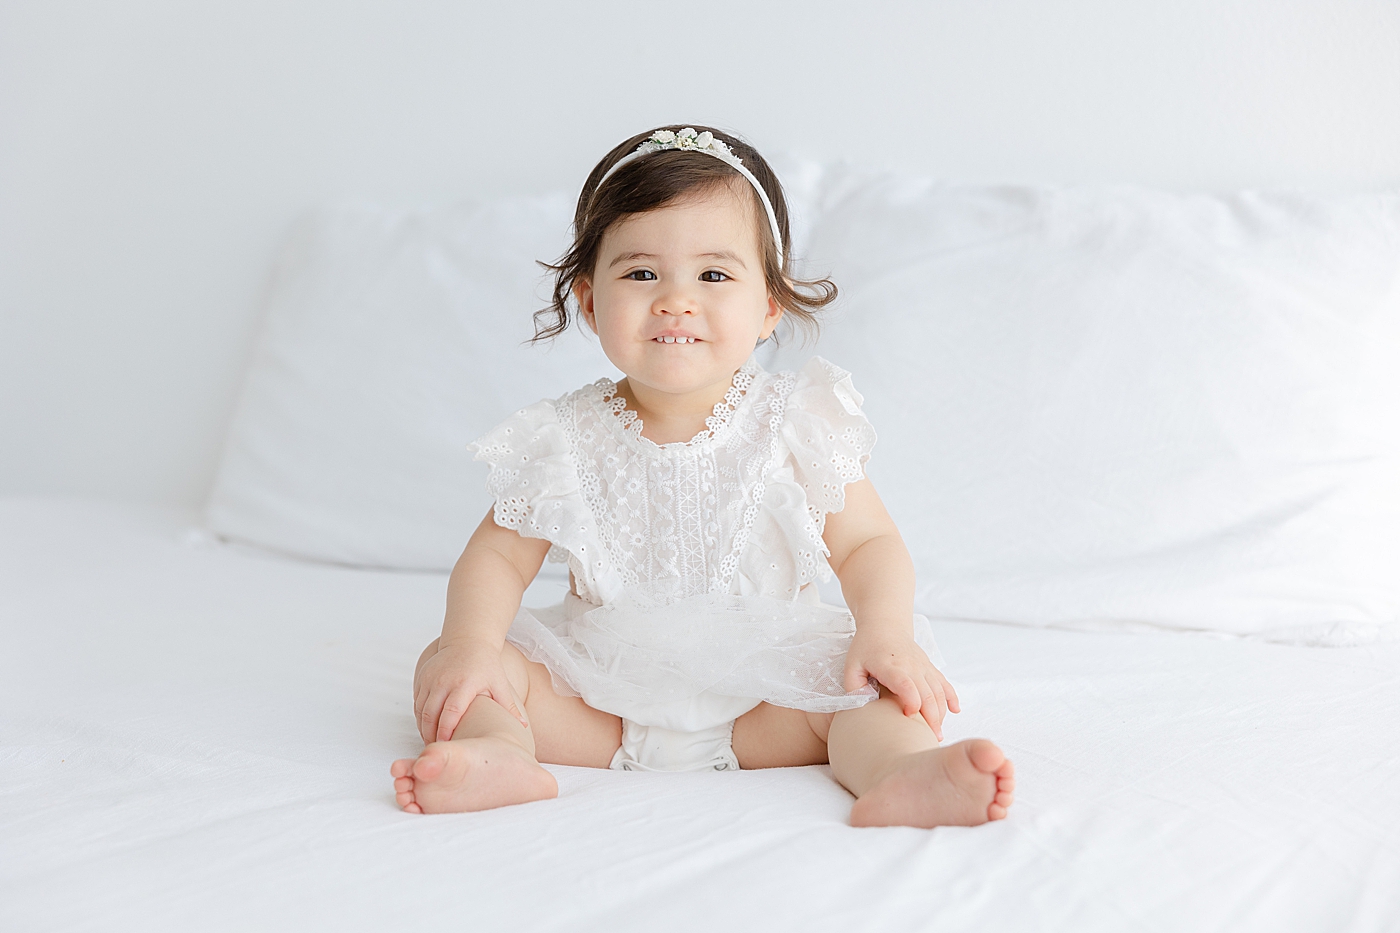 Baby girl in a white dress and headband smiling while sitting on a bed | Image by Sana Ahmed Photography